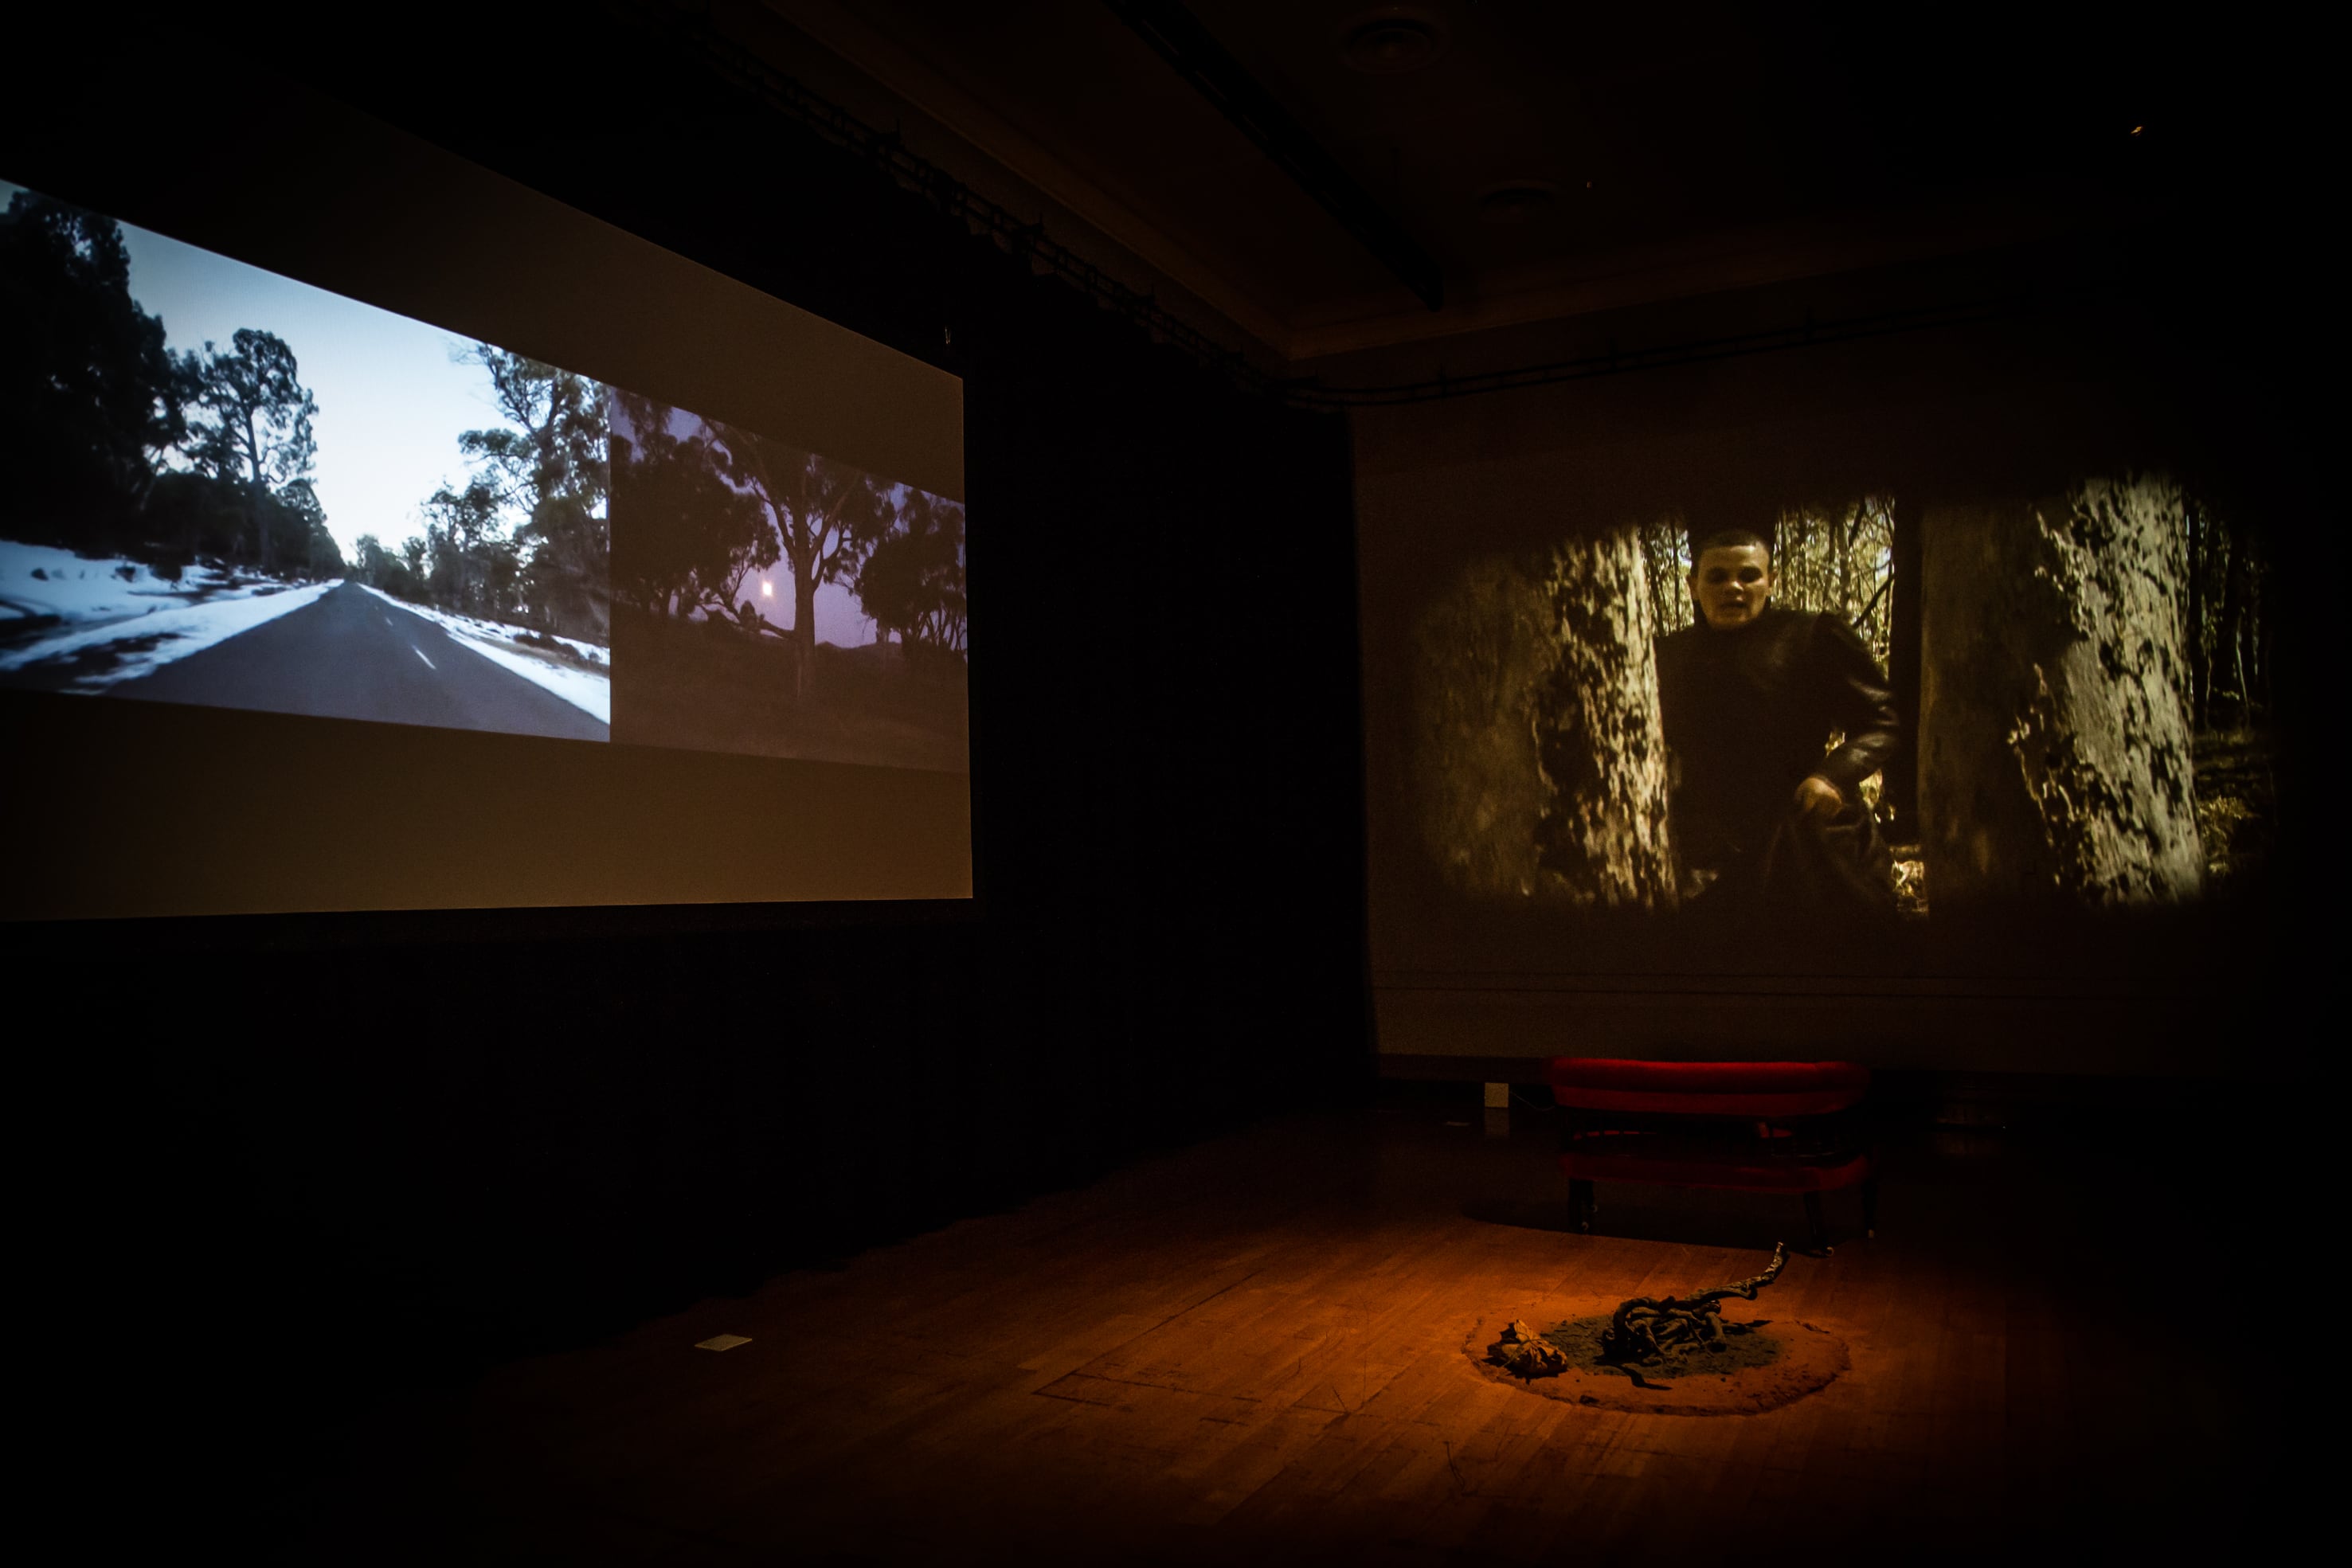 Image 02: Julie Gough, *The Grounds of Surrender* 2011, video (19:17 mins). Image courtesy the artist. Photo credit: Bryony Jackson.